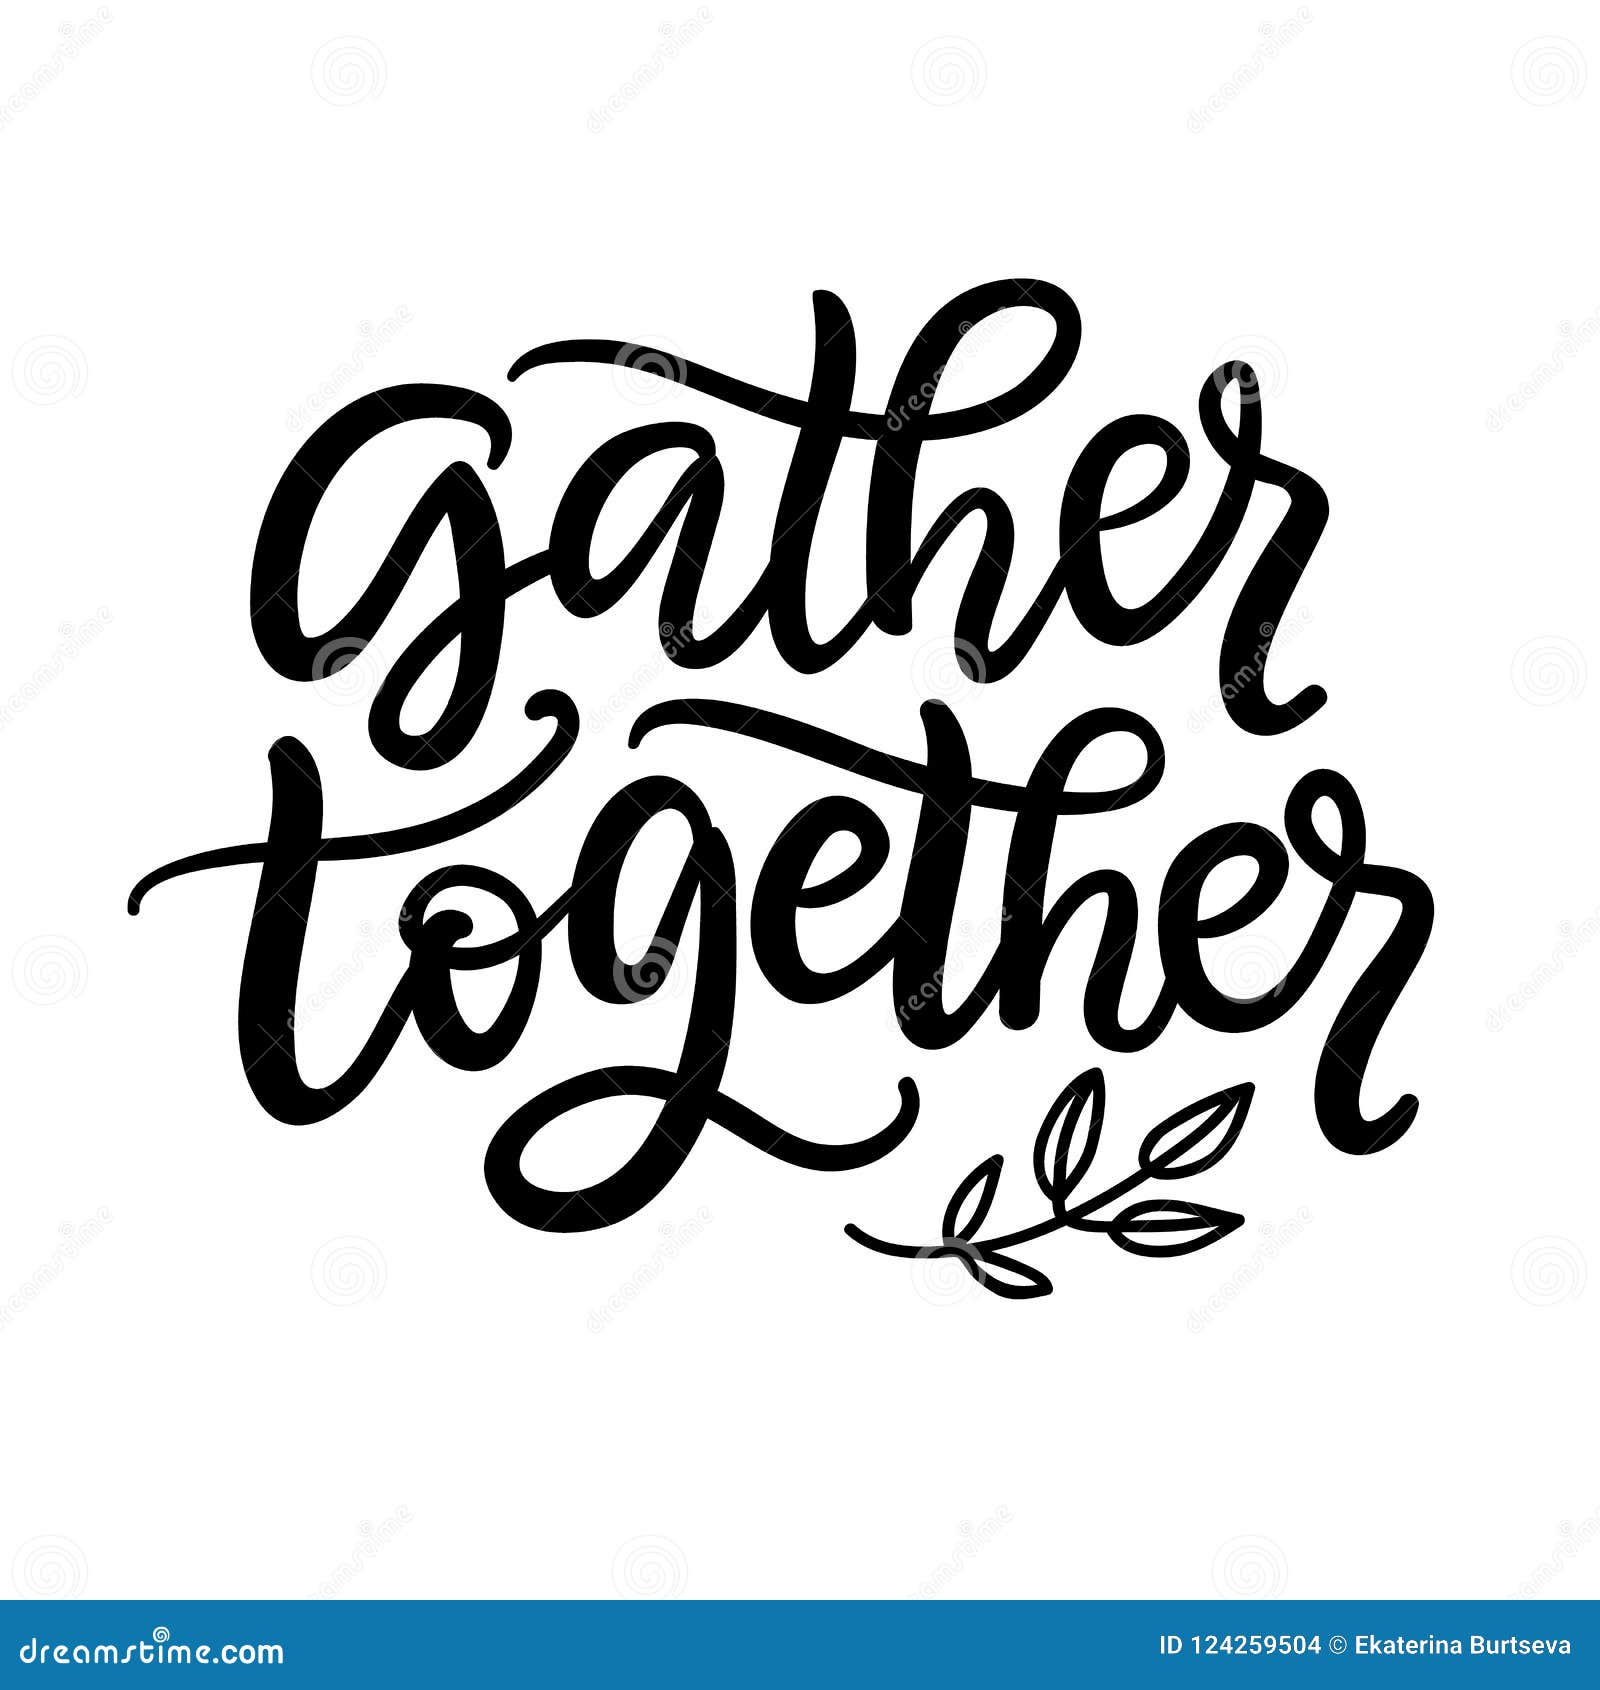 gather together typography poster with hand written lettering